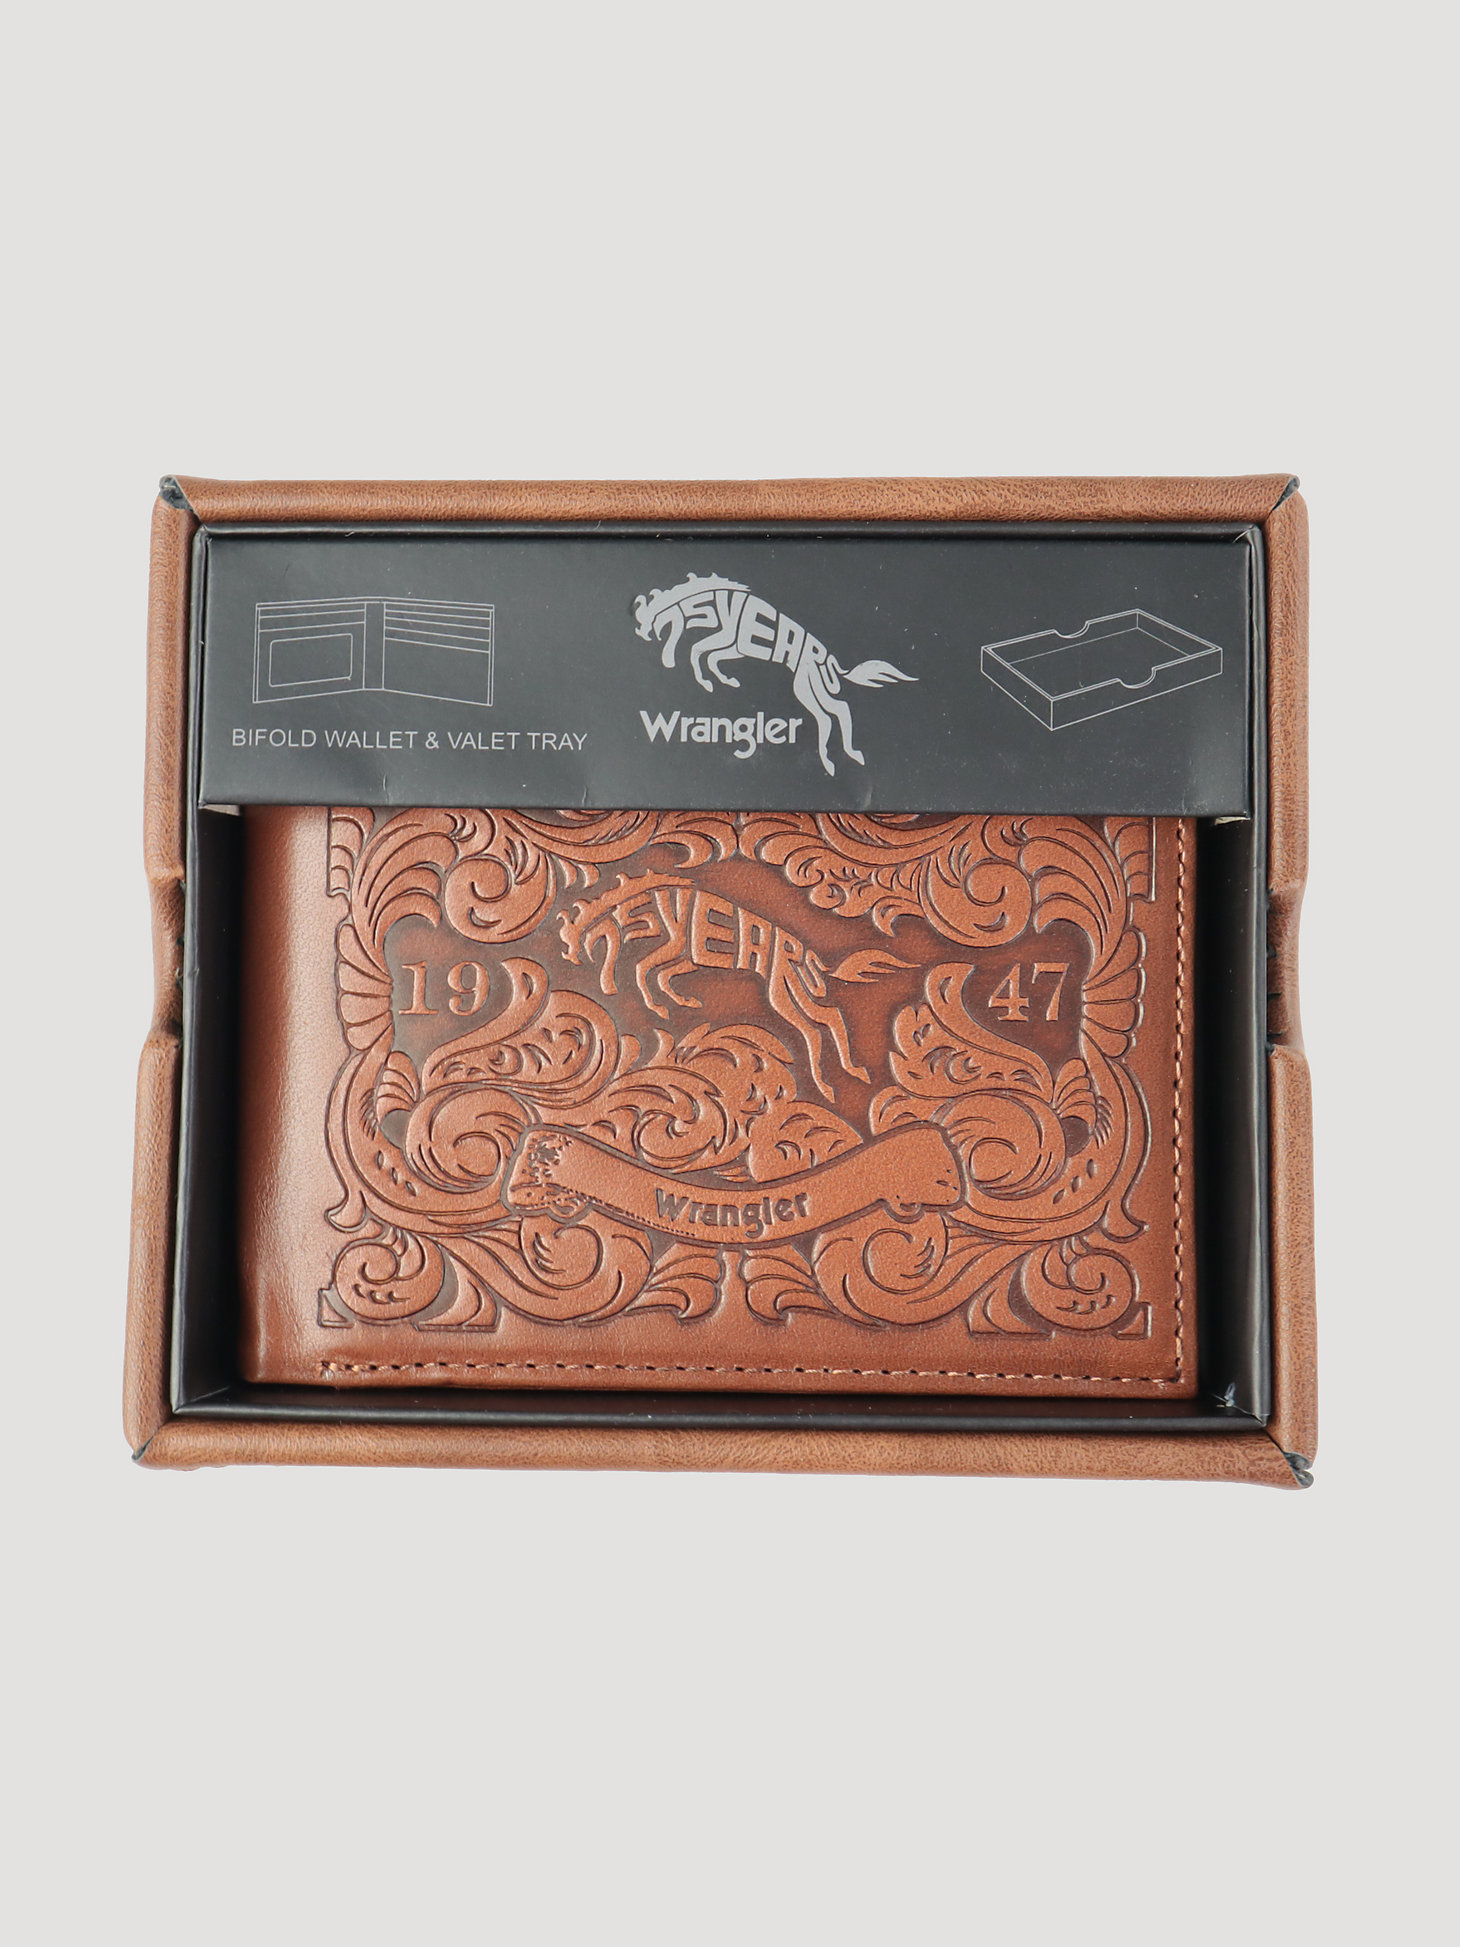 Wrangler Tooled Leather Bifold Wallet in Brown alternative view 1